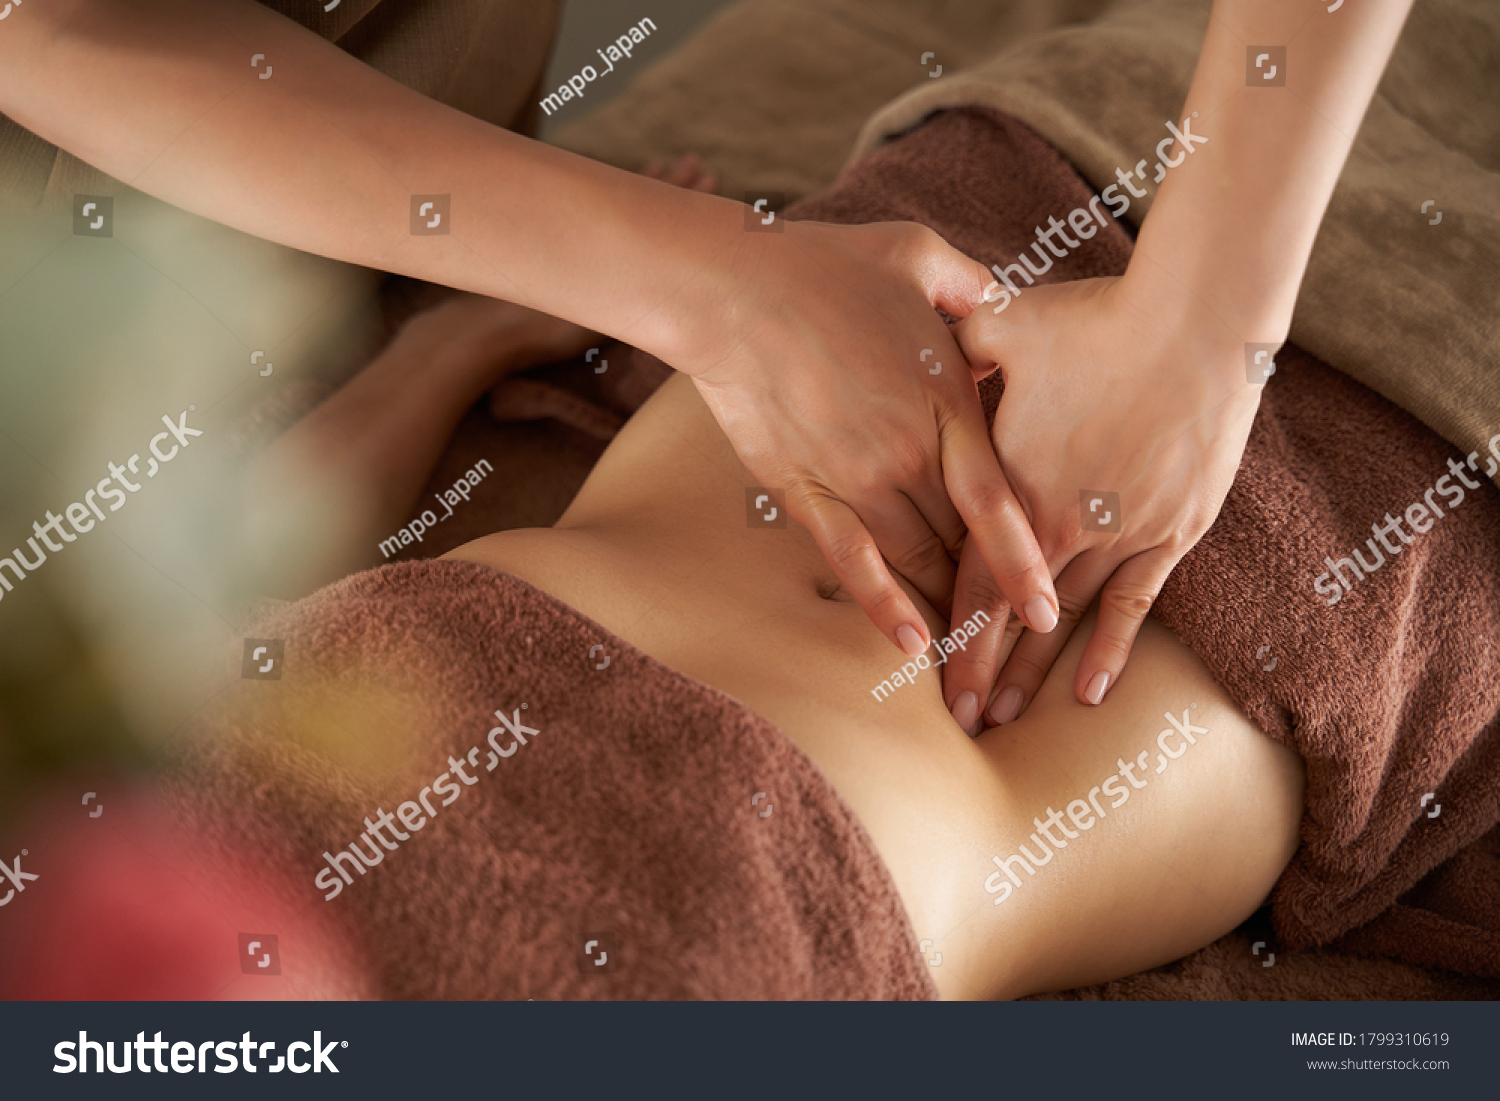 Japanese woman getting a belly massage at a beauty salon #1799310619